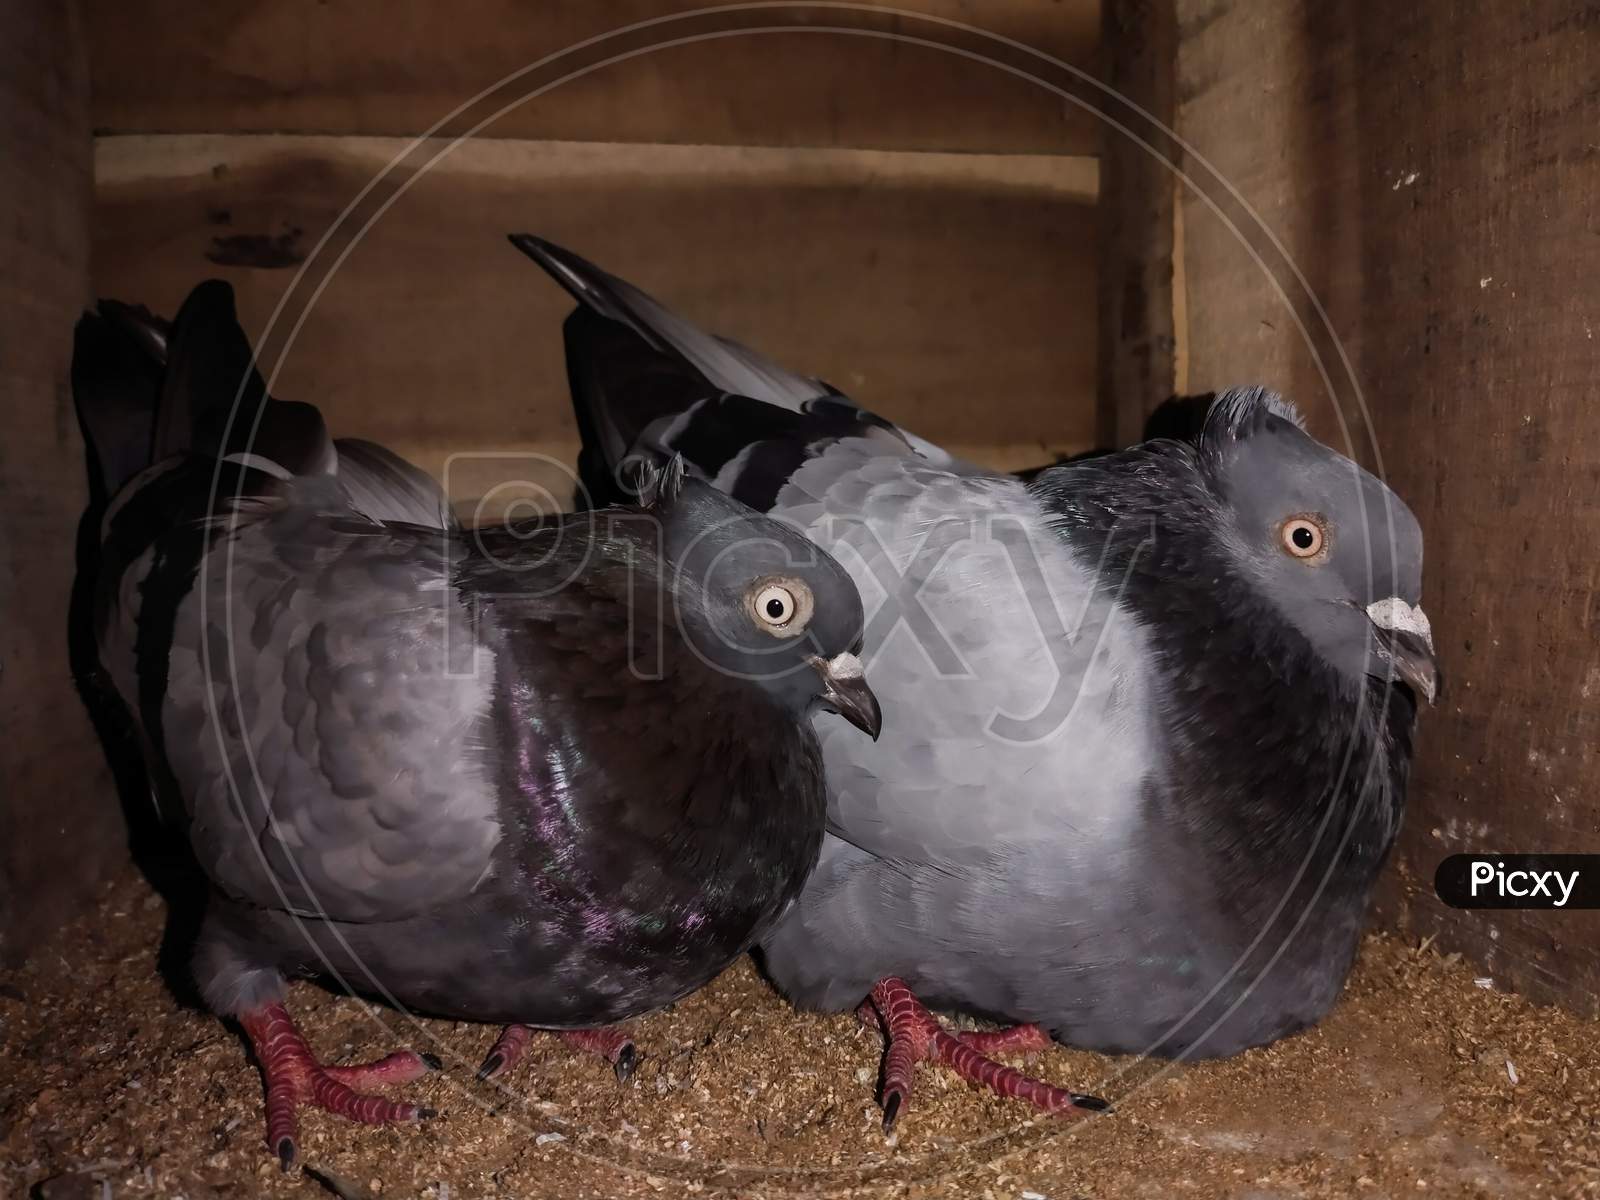 Angry Couple Pigeon Sitting Home